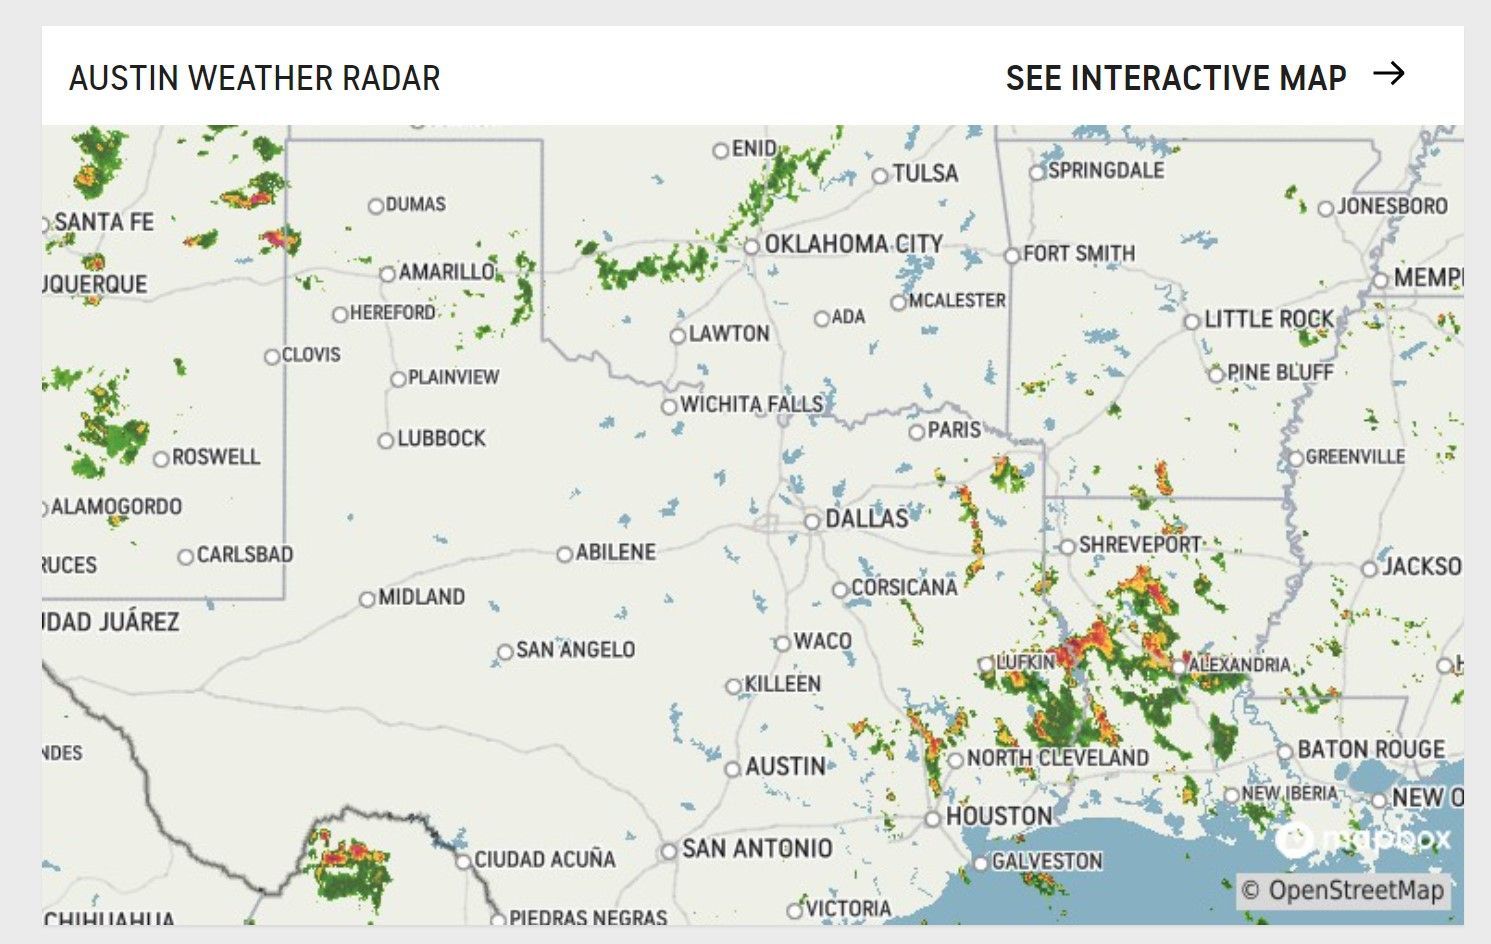 AccuWeather interactive map